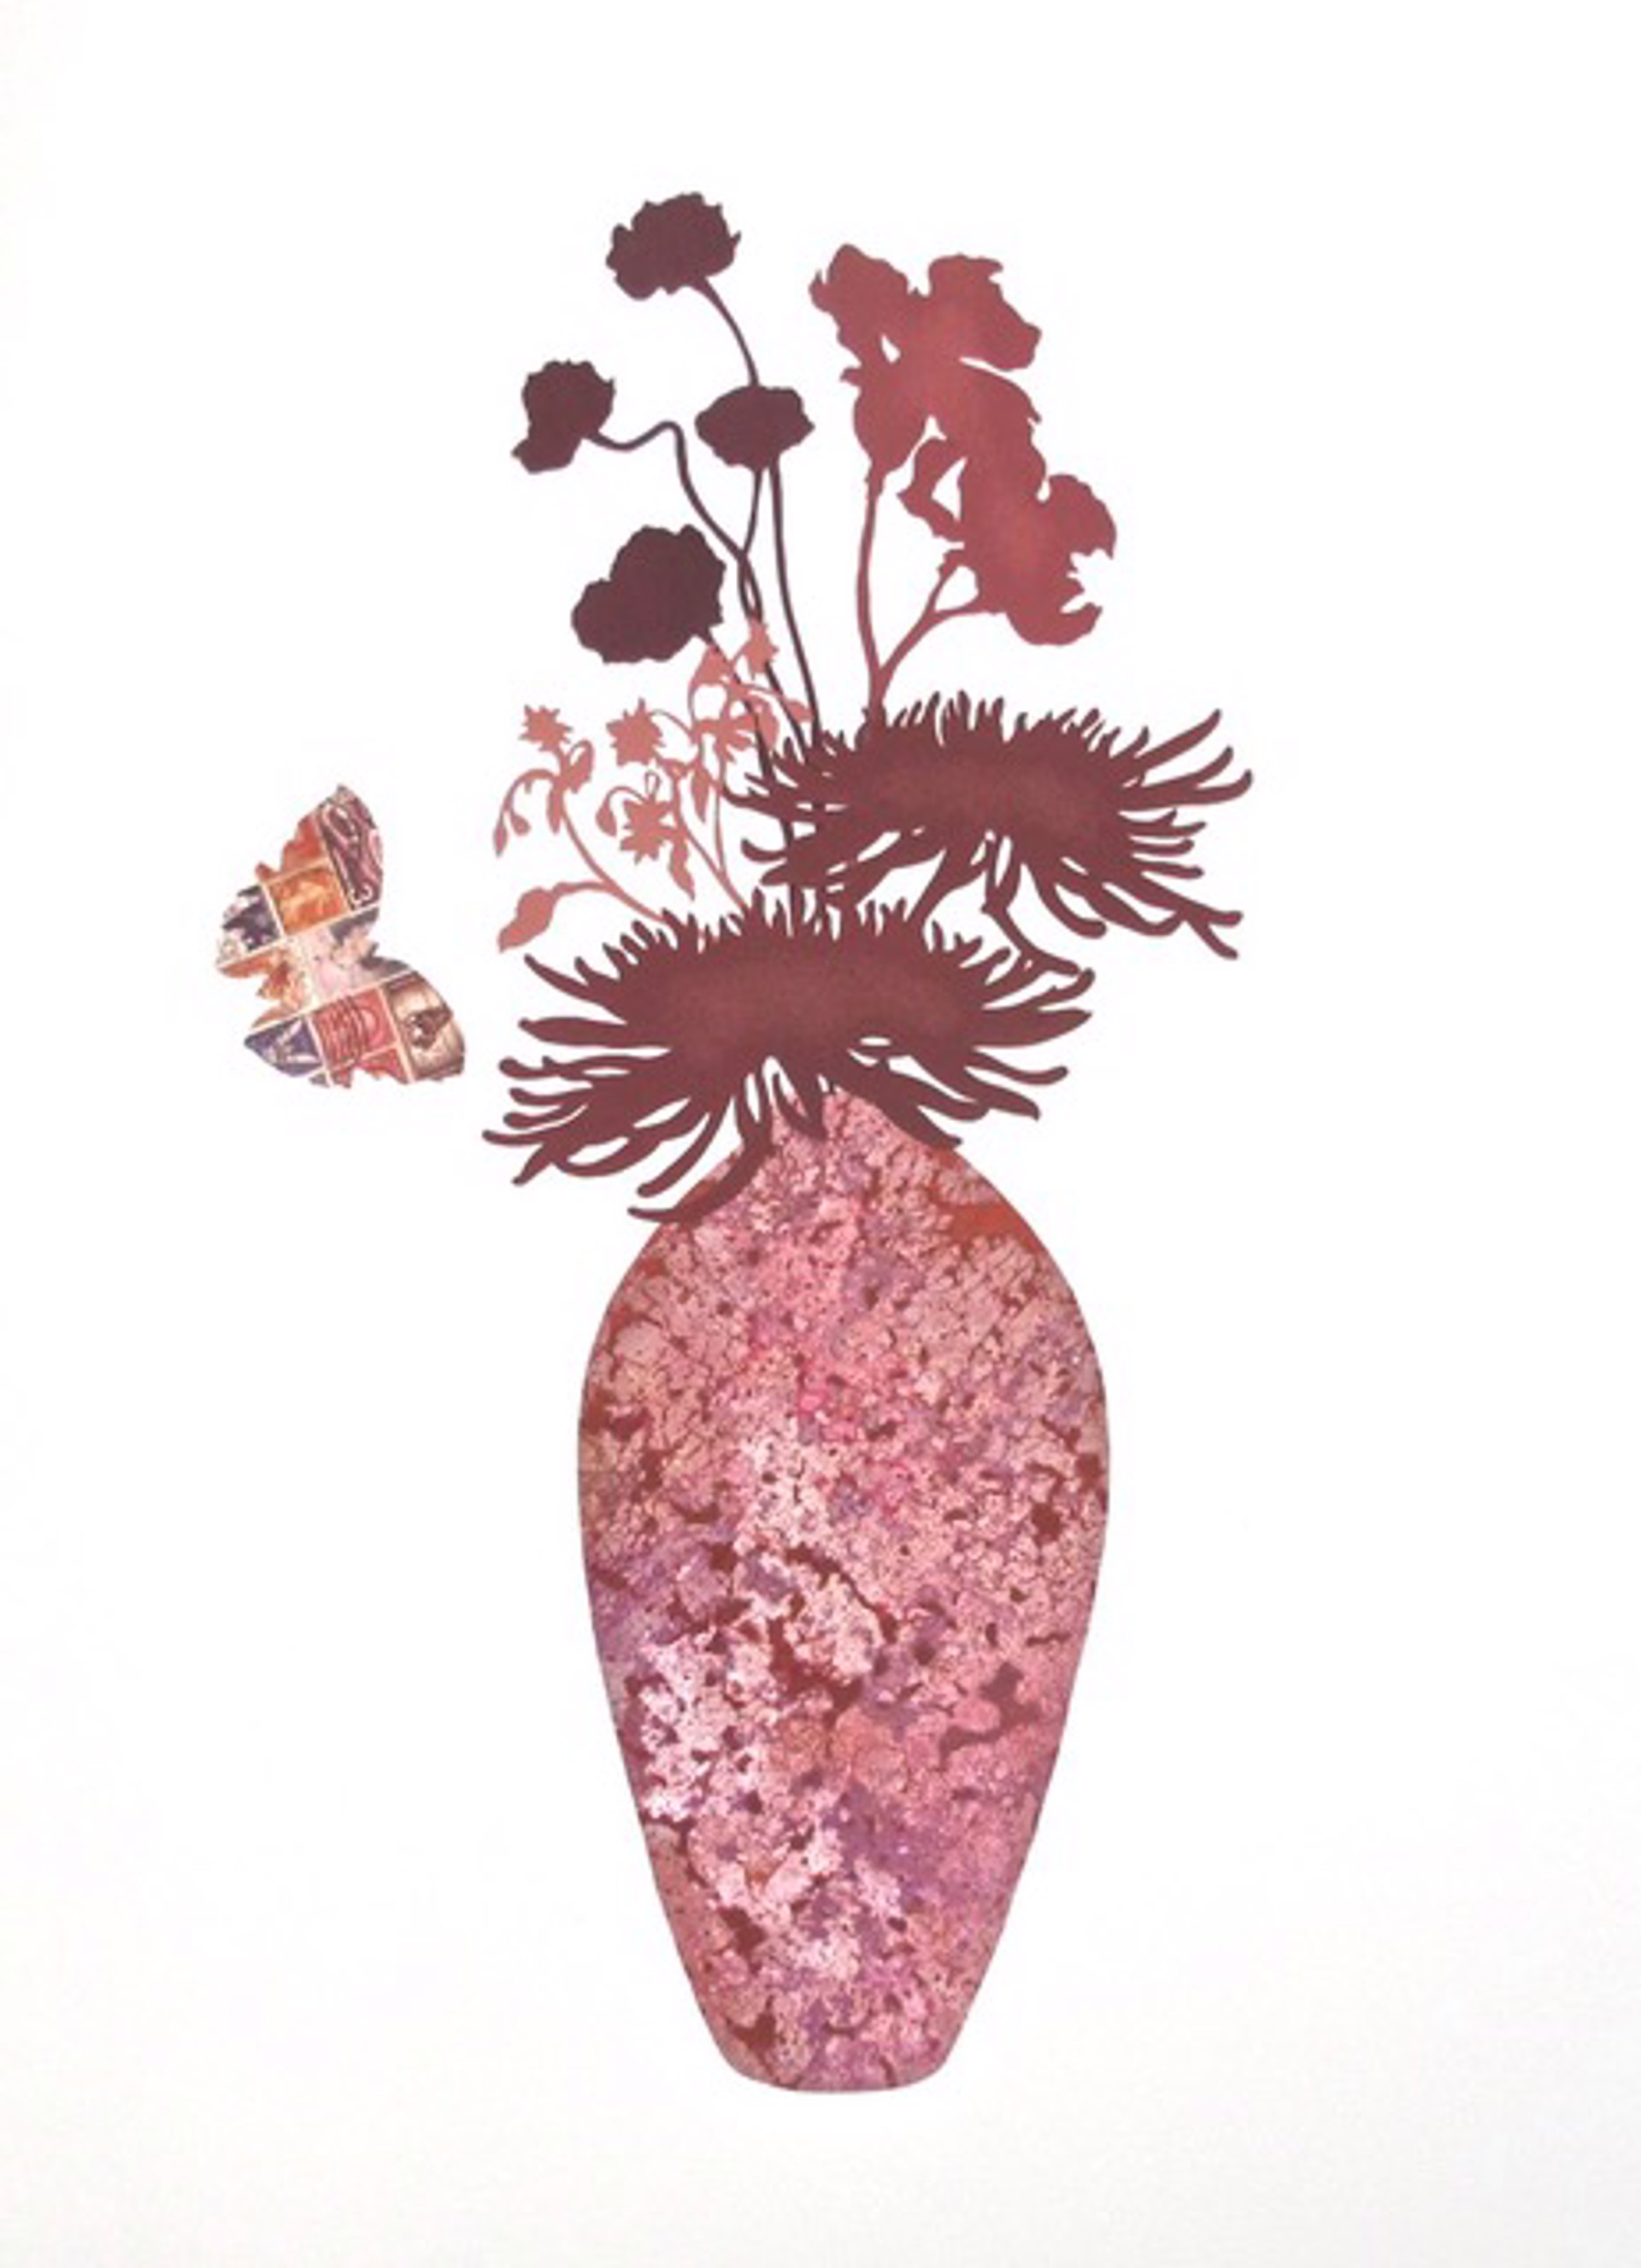 New Blooms + Butterfly No. 3 by Deborah Weiss